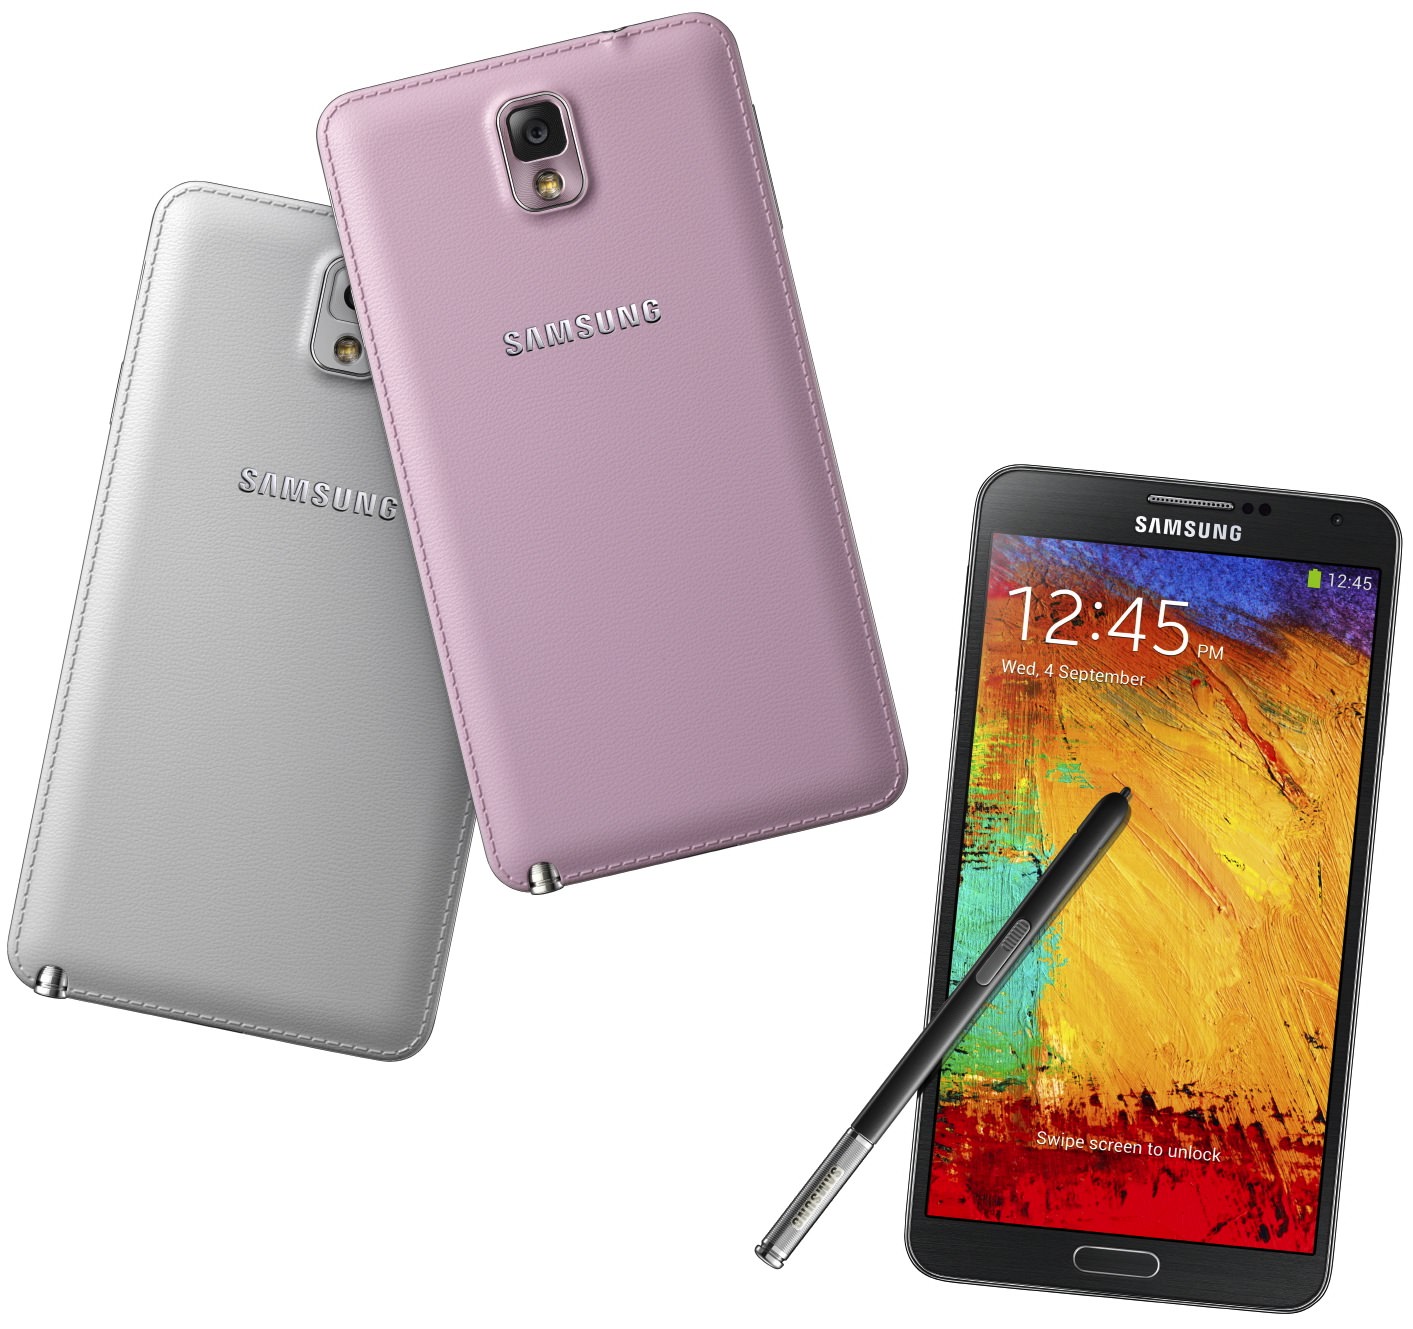 Galaxy Note 2 versus Galaxy Note 3 : les spécifications